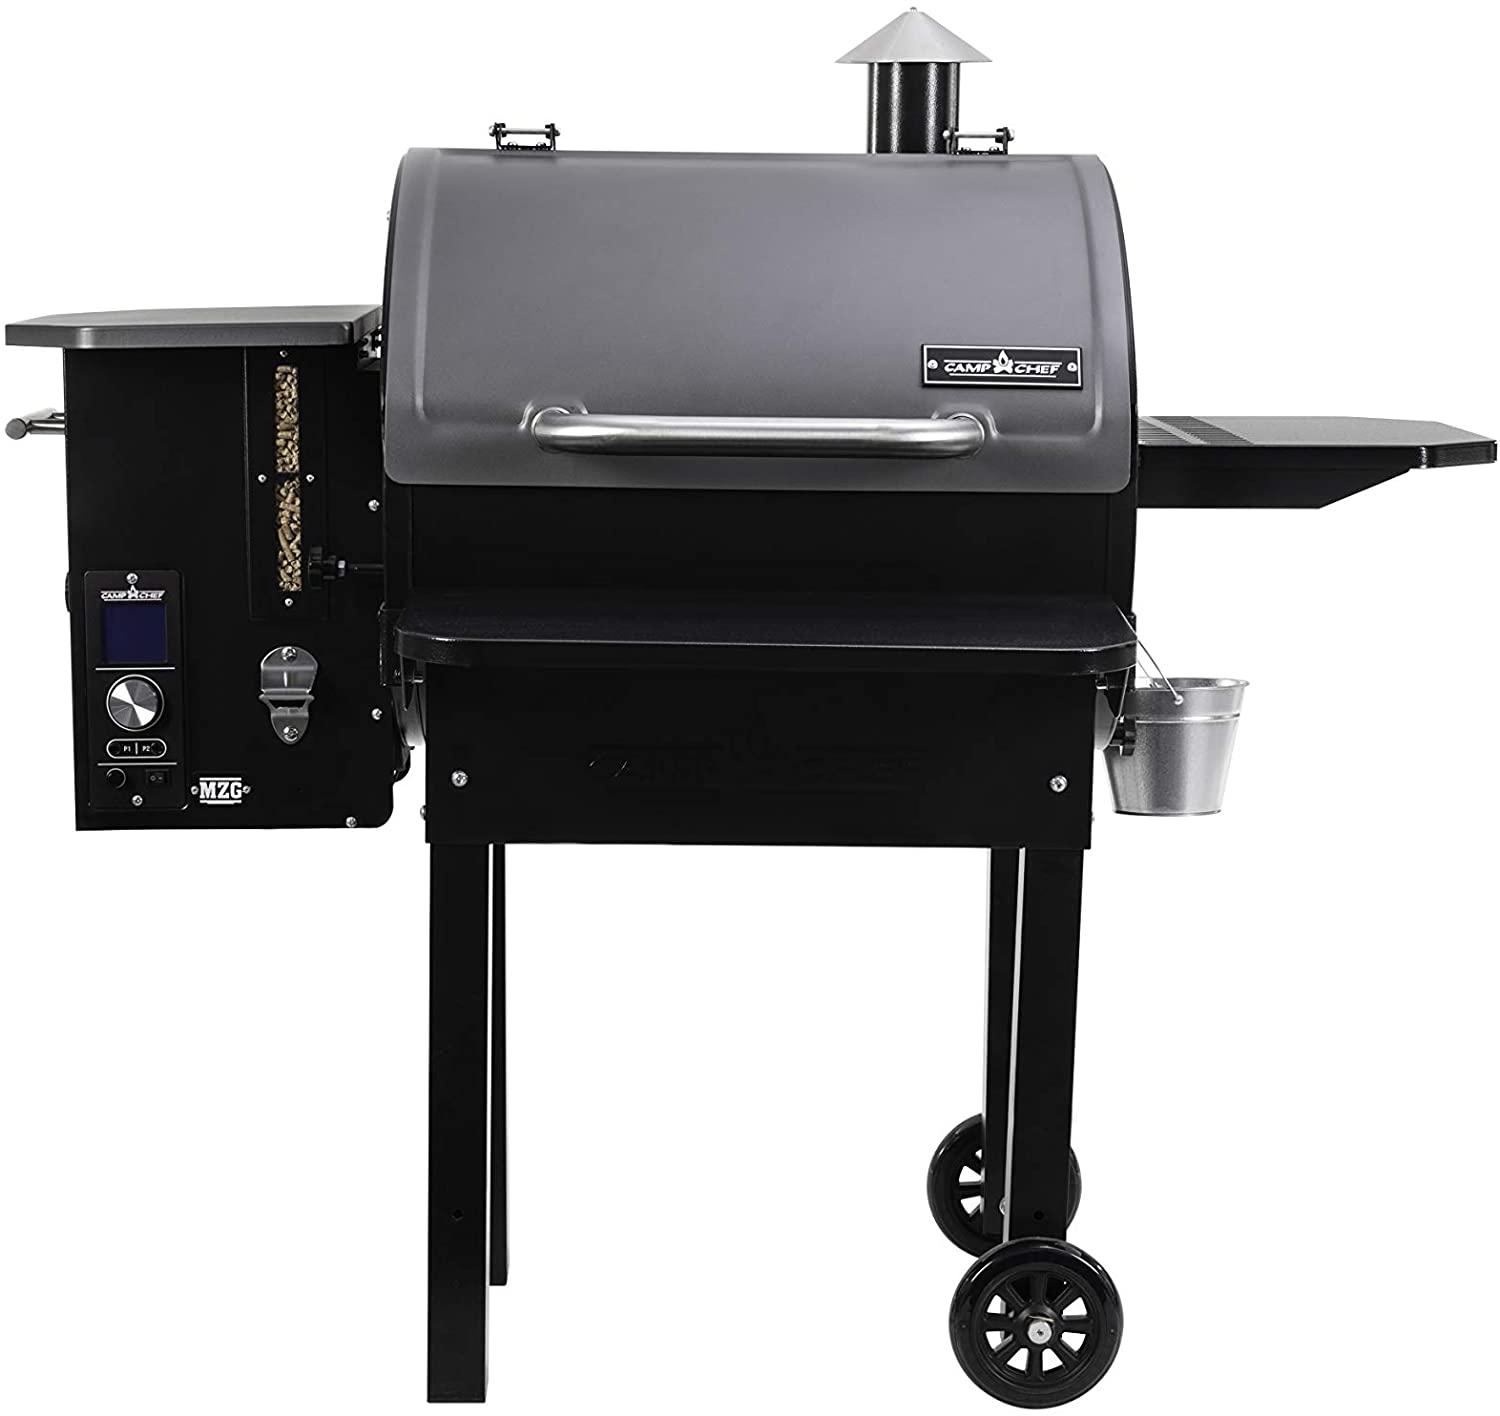 Camp Chef SmokePro Front Shelf Wood Pellet Slide Smoker Grill for $450.66 Shipped